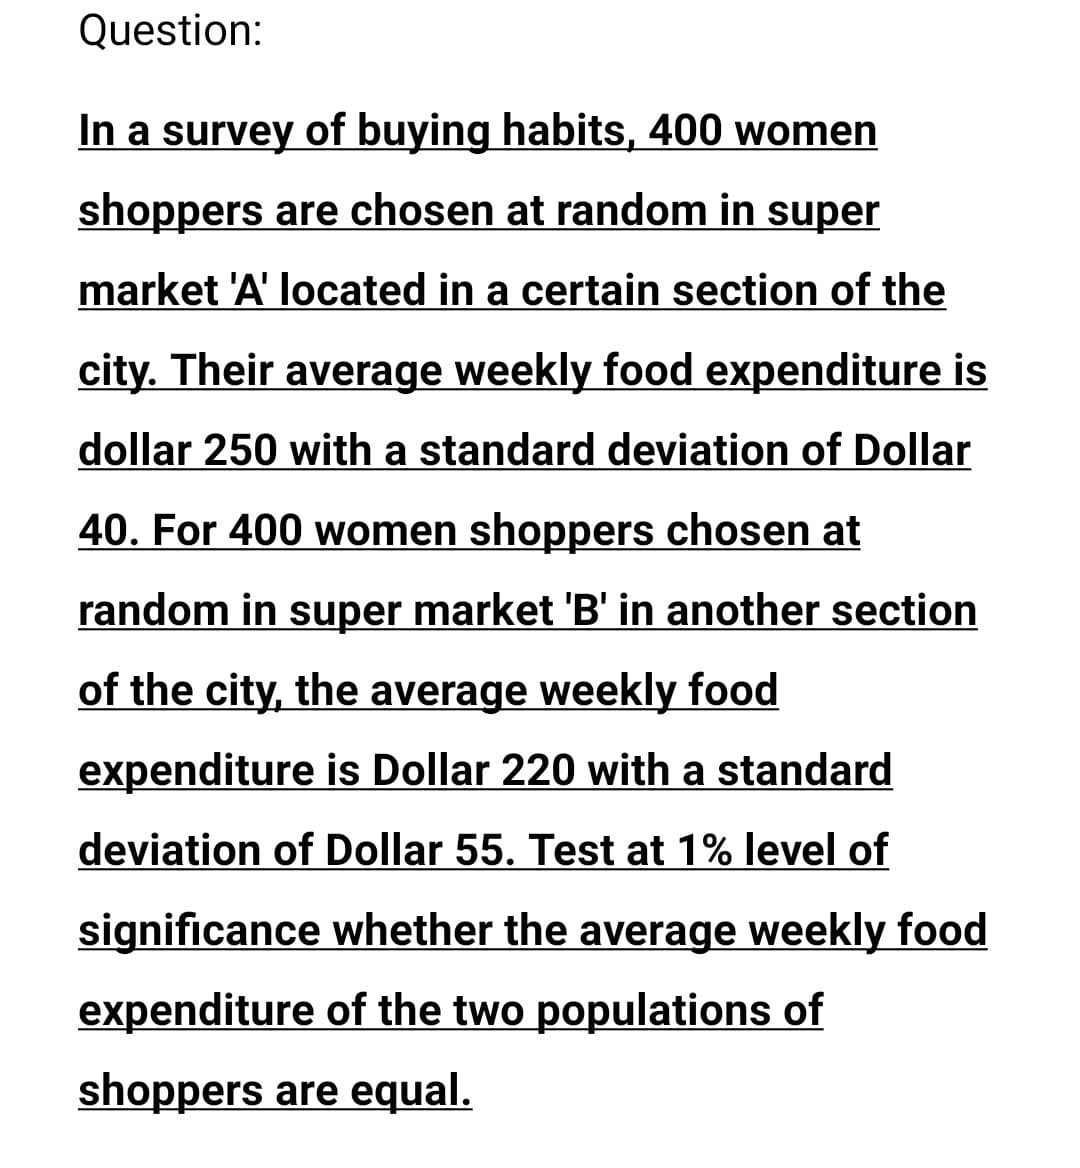 Question:
In a survey of buying habits, 400 women
shoppers are chosen at random in super
market 'A' located in a certain section of the
city. Their average weekly food expenditure is
dollar 250 with a standard deviation of Dollar
40. For 400 women shoppers chosen at
random in super market 'B' in another section
of the city, the average weekly food
expenditure is Dollar 220 with a standard
deviation of Dollar 55. Test at 1% level of
significance whether the average weekly food
expenditure of the two populations of
shoppers are equal.
